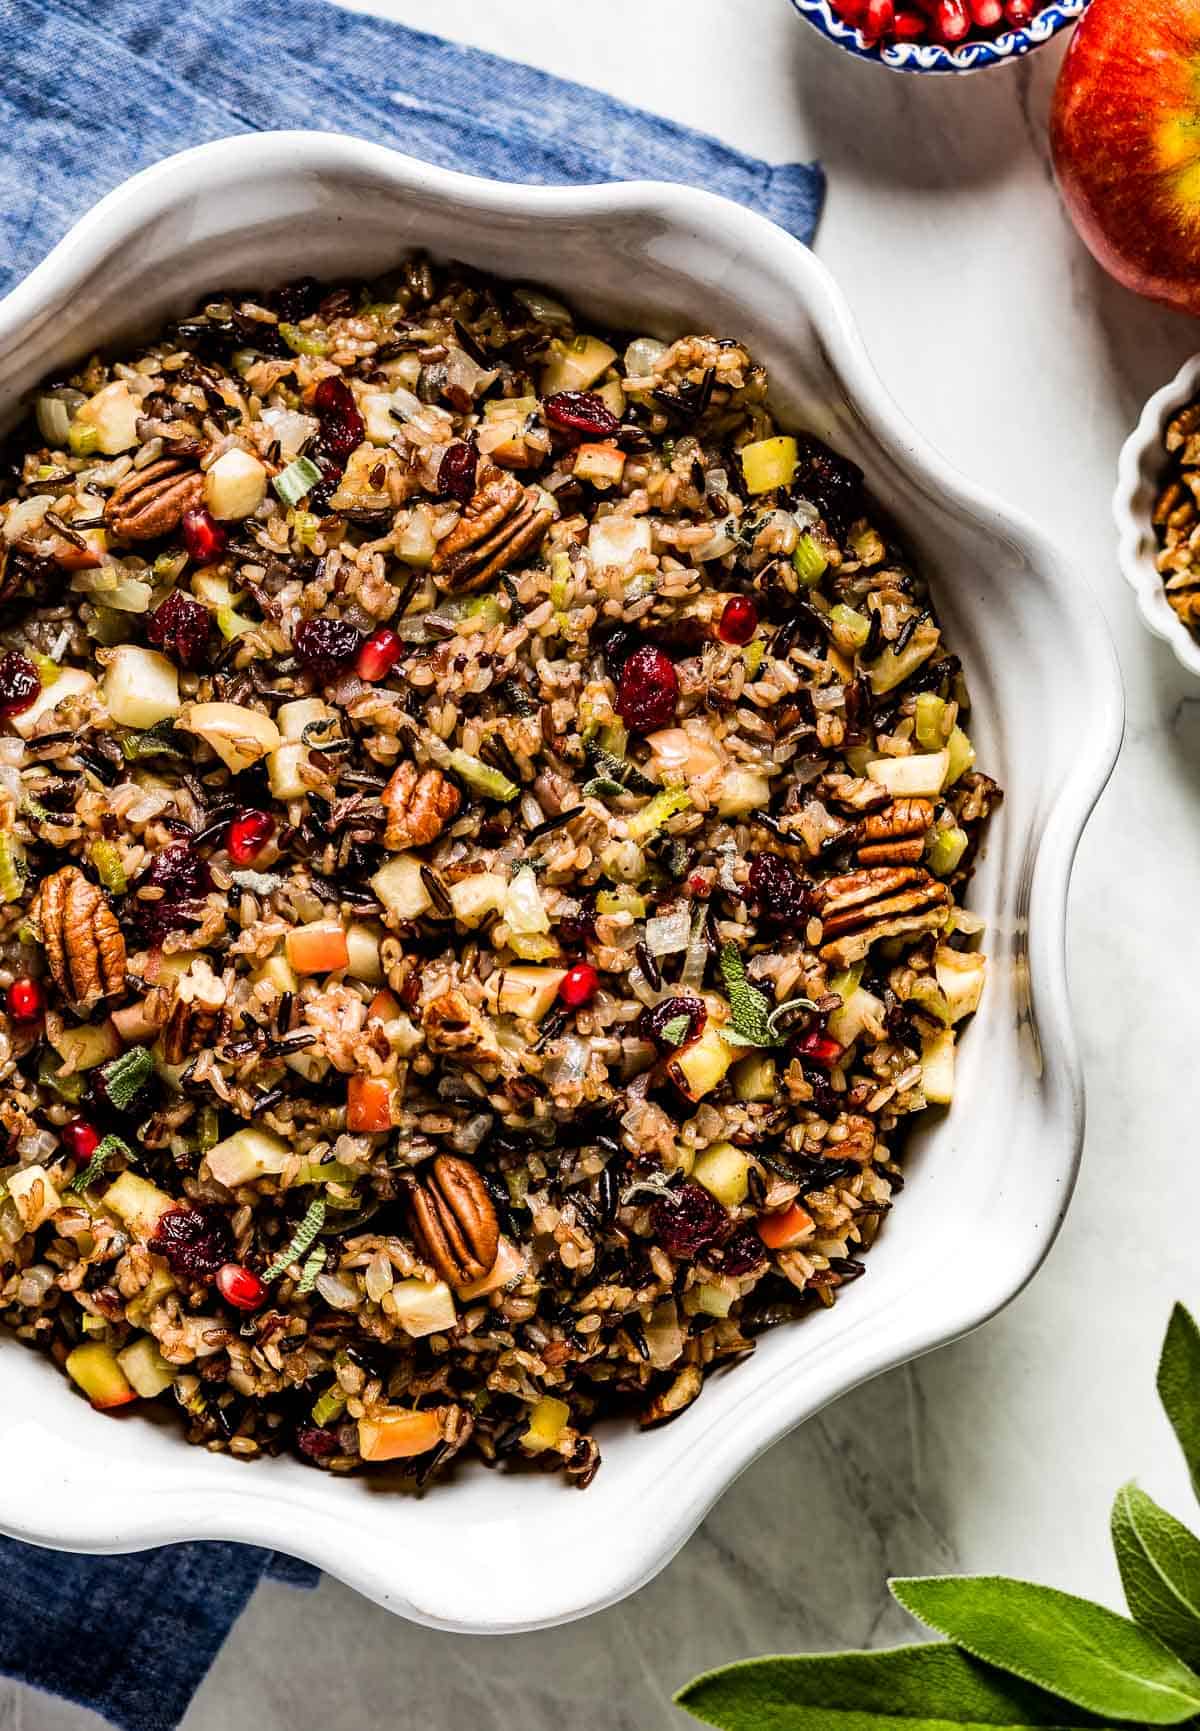 Wild rice stuffing recipe placed in a bowl from the top view